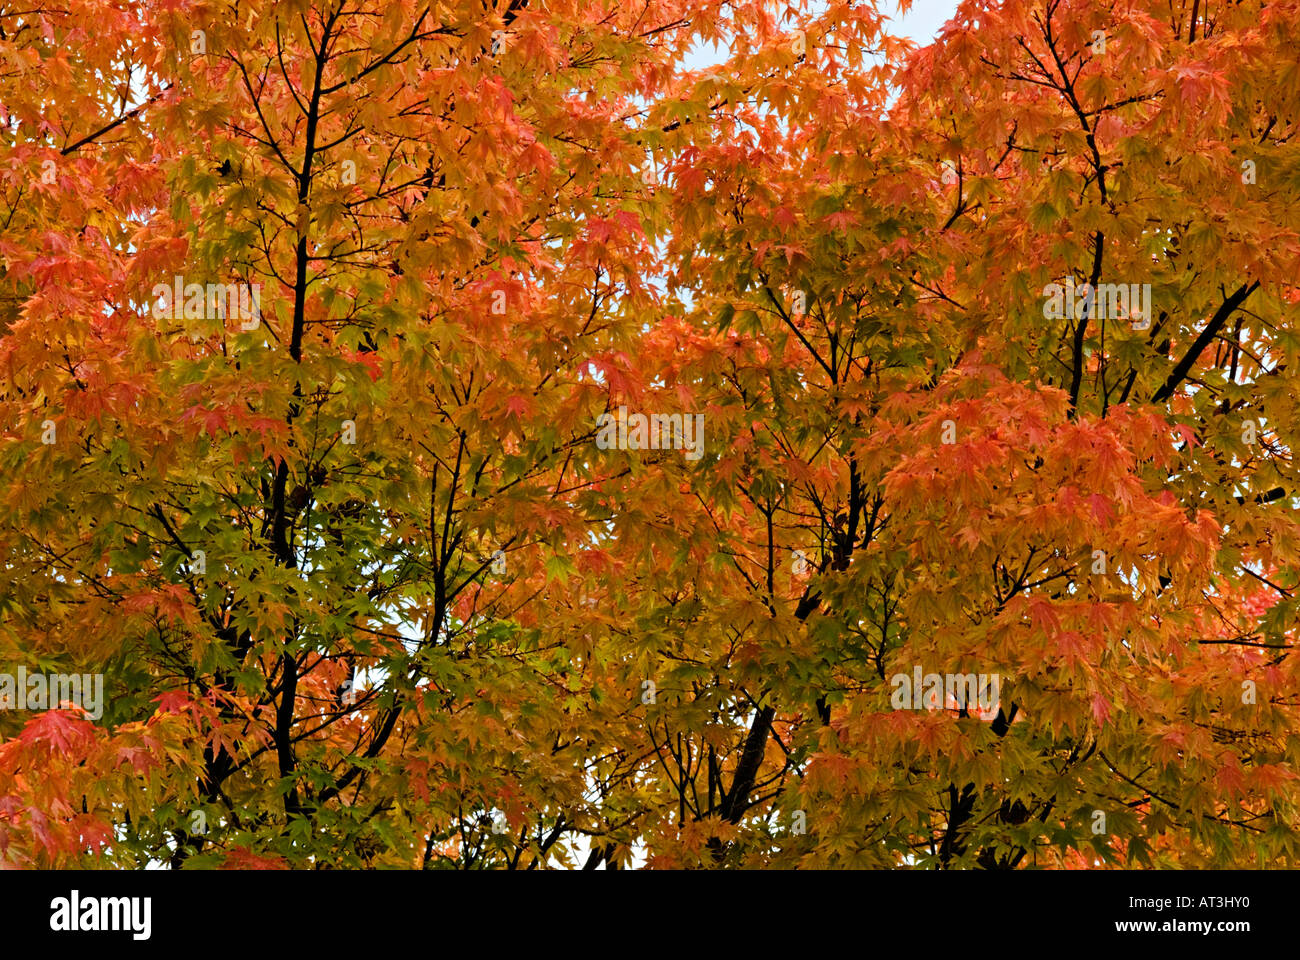 Vibrant coloured foliage on young trees Stock Photo